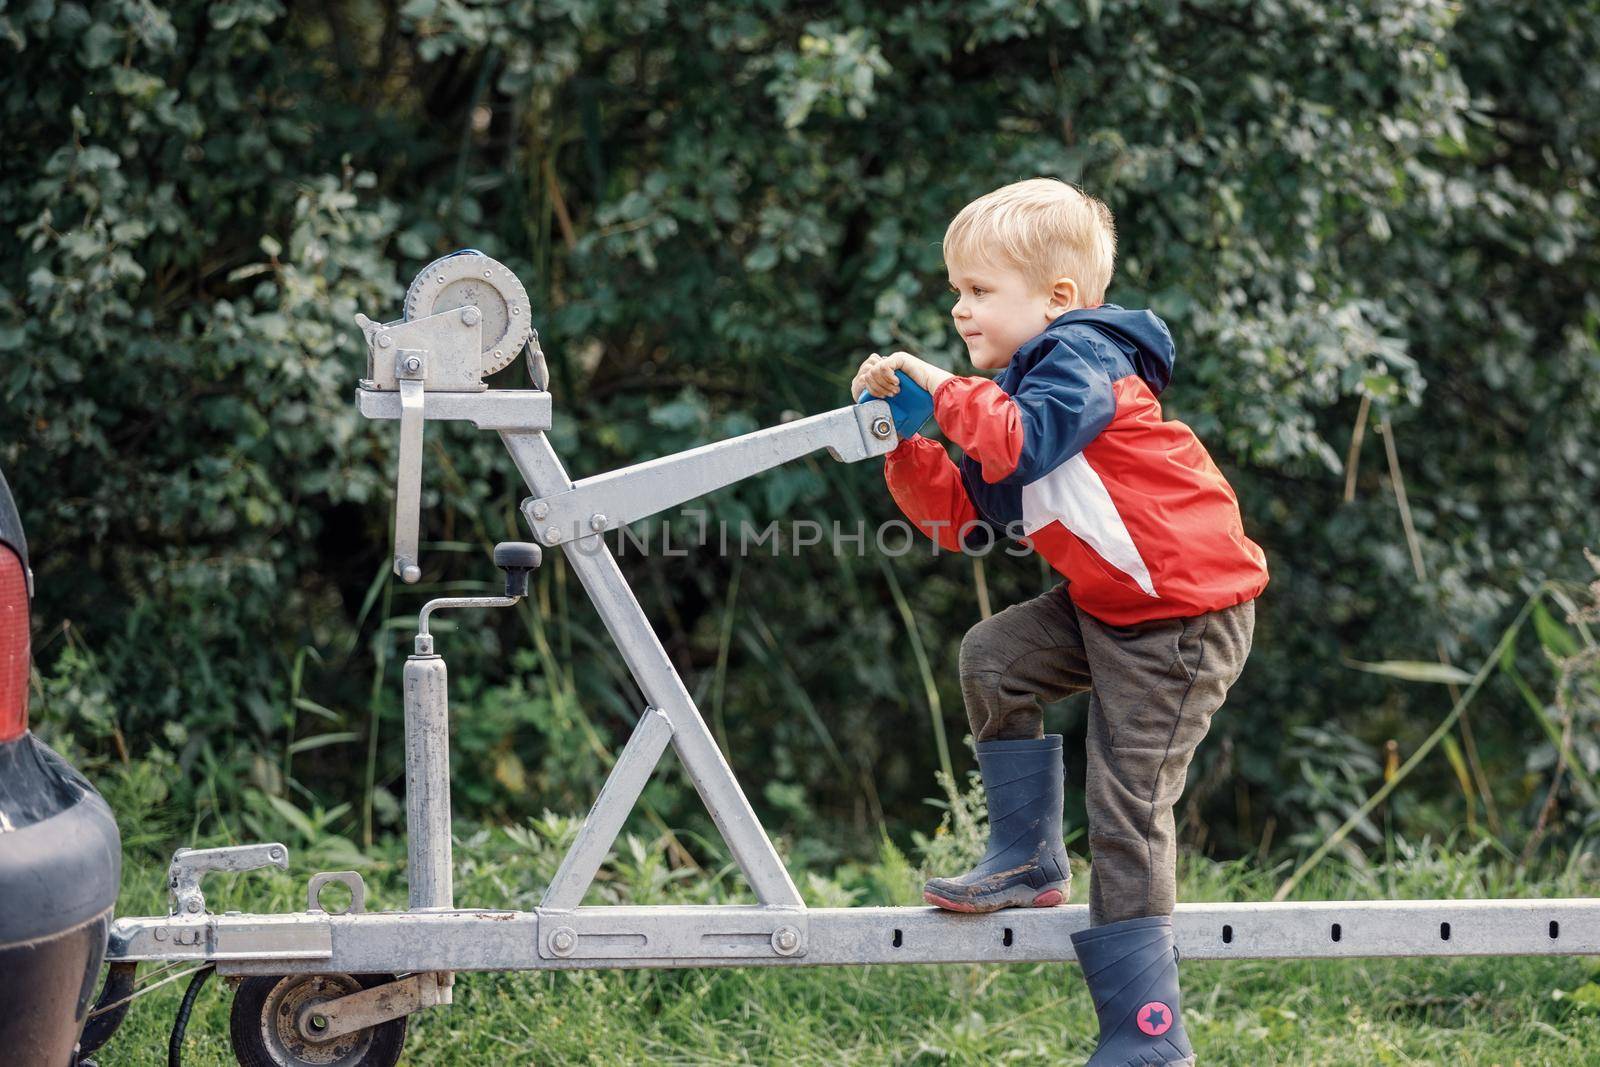 An agile child sports on a boat trailer mechanism in nature by Lincikas